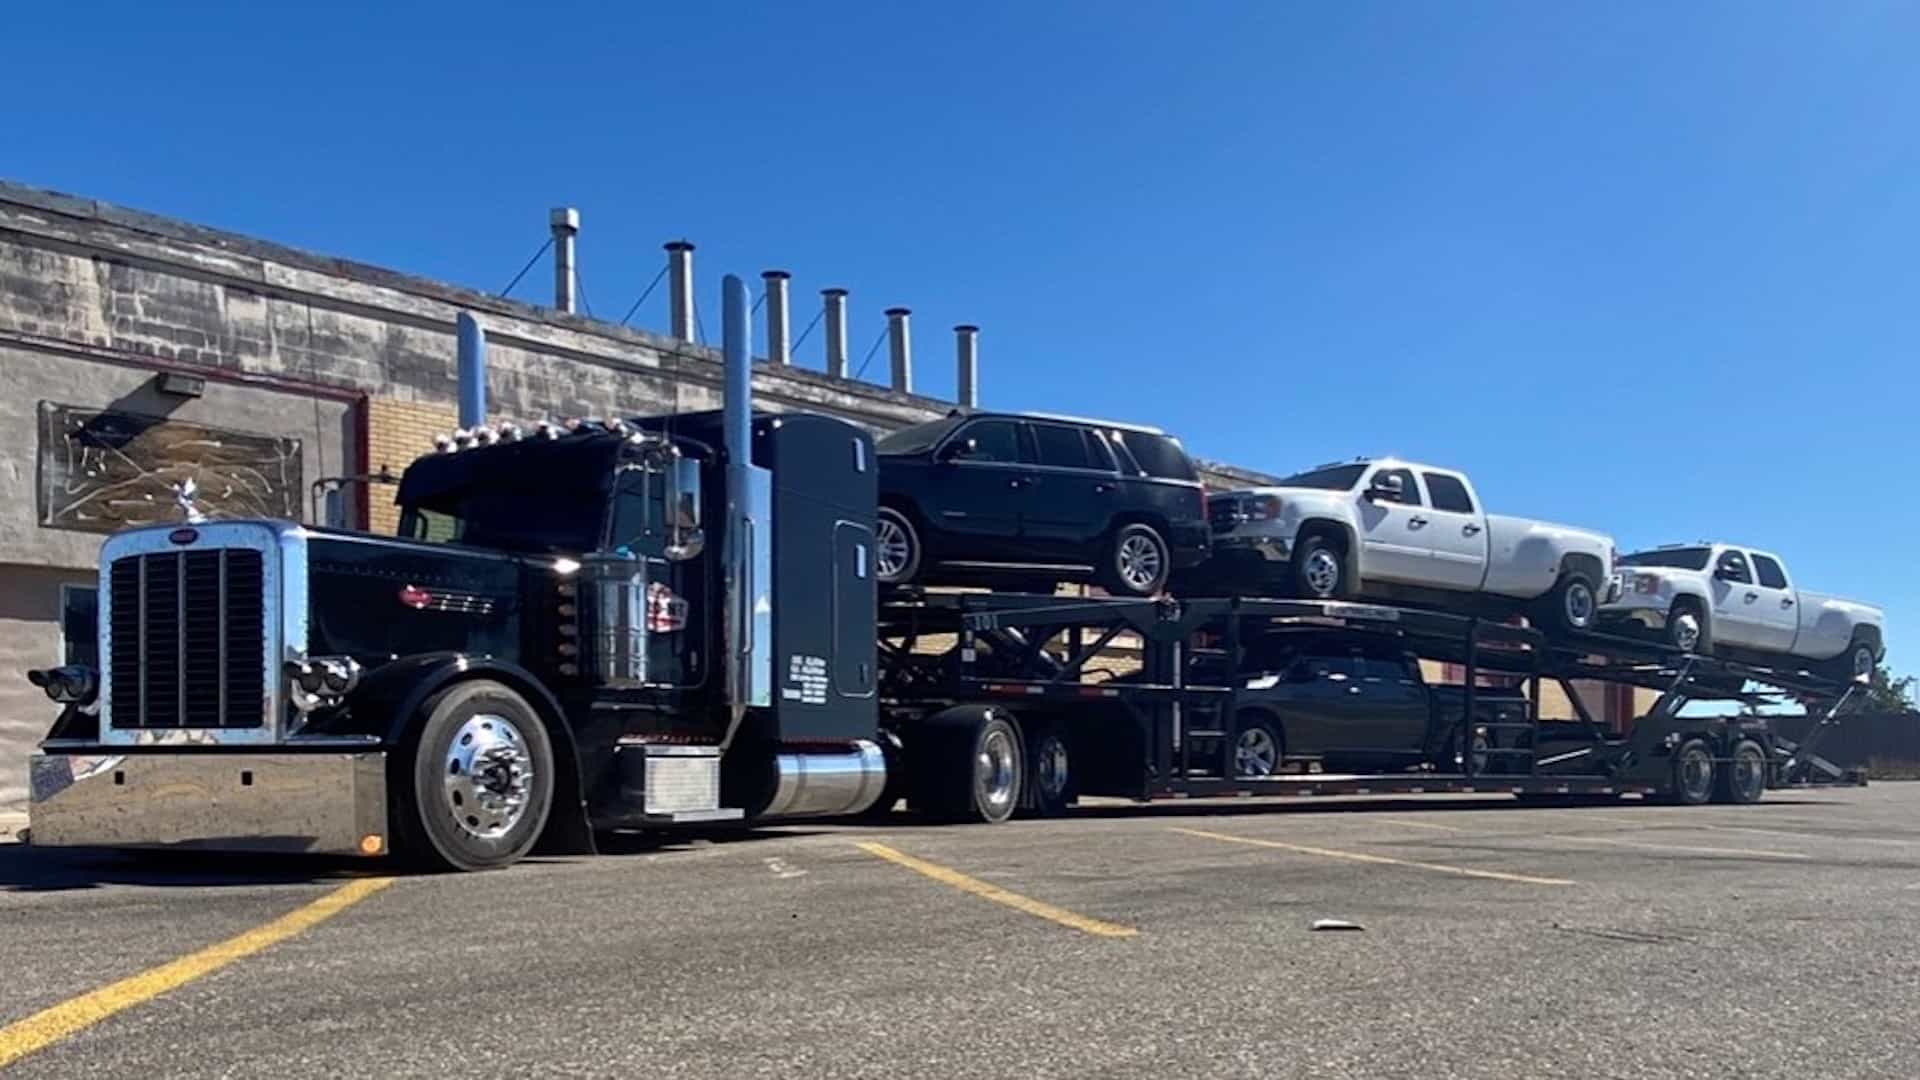 A ProN2 truck hauling two decks of cars